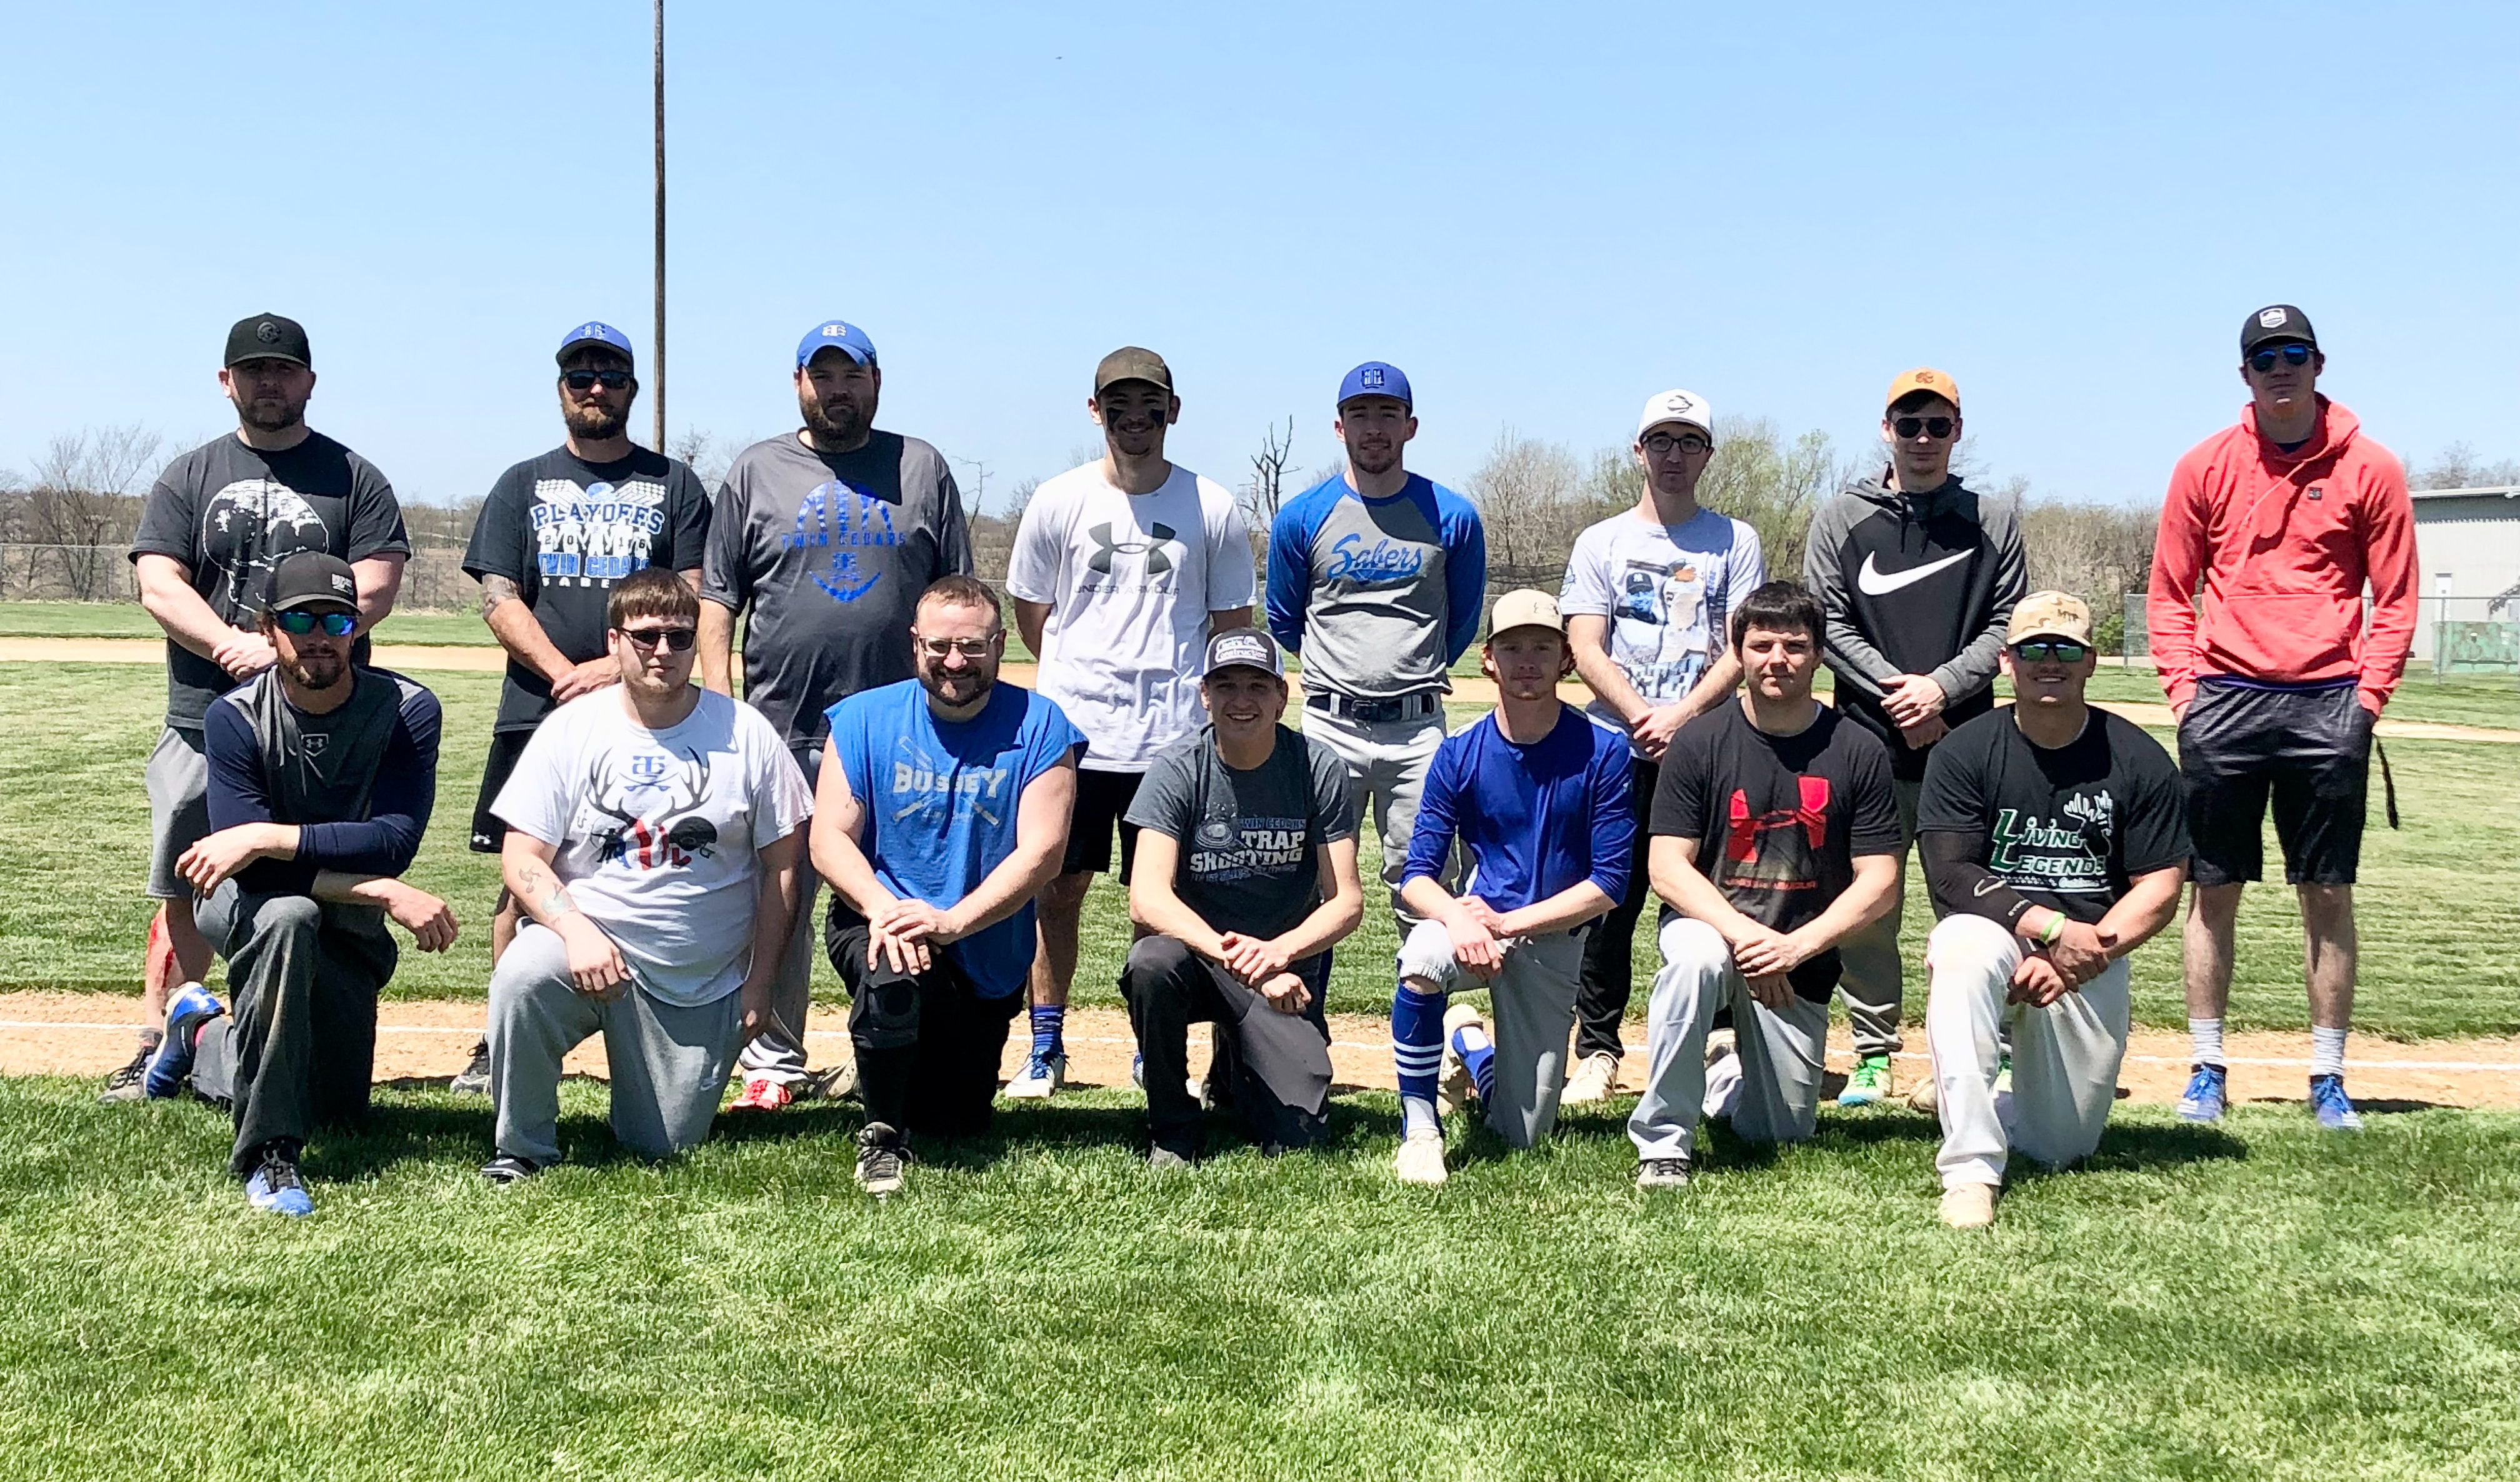 Players from the alumni baseball game.